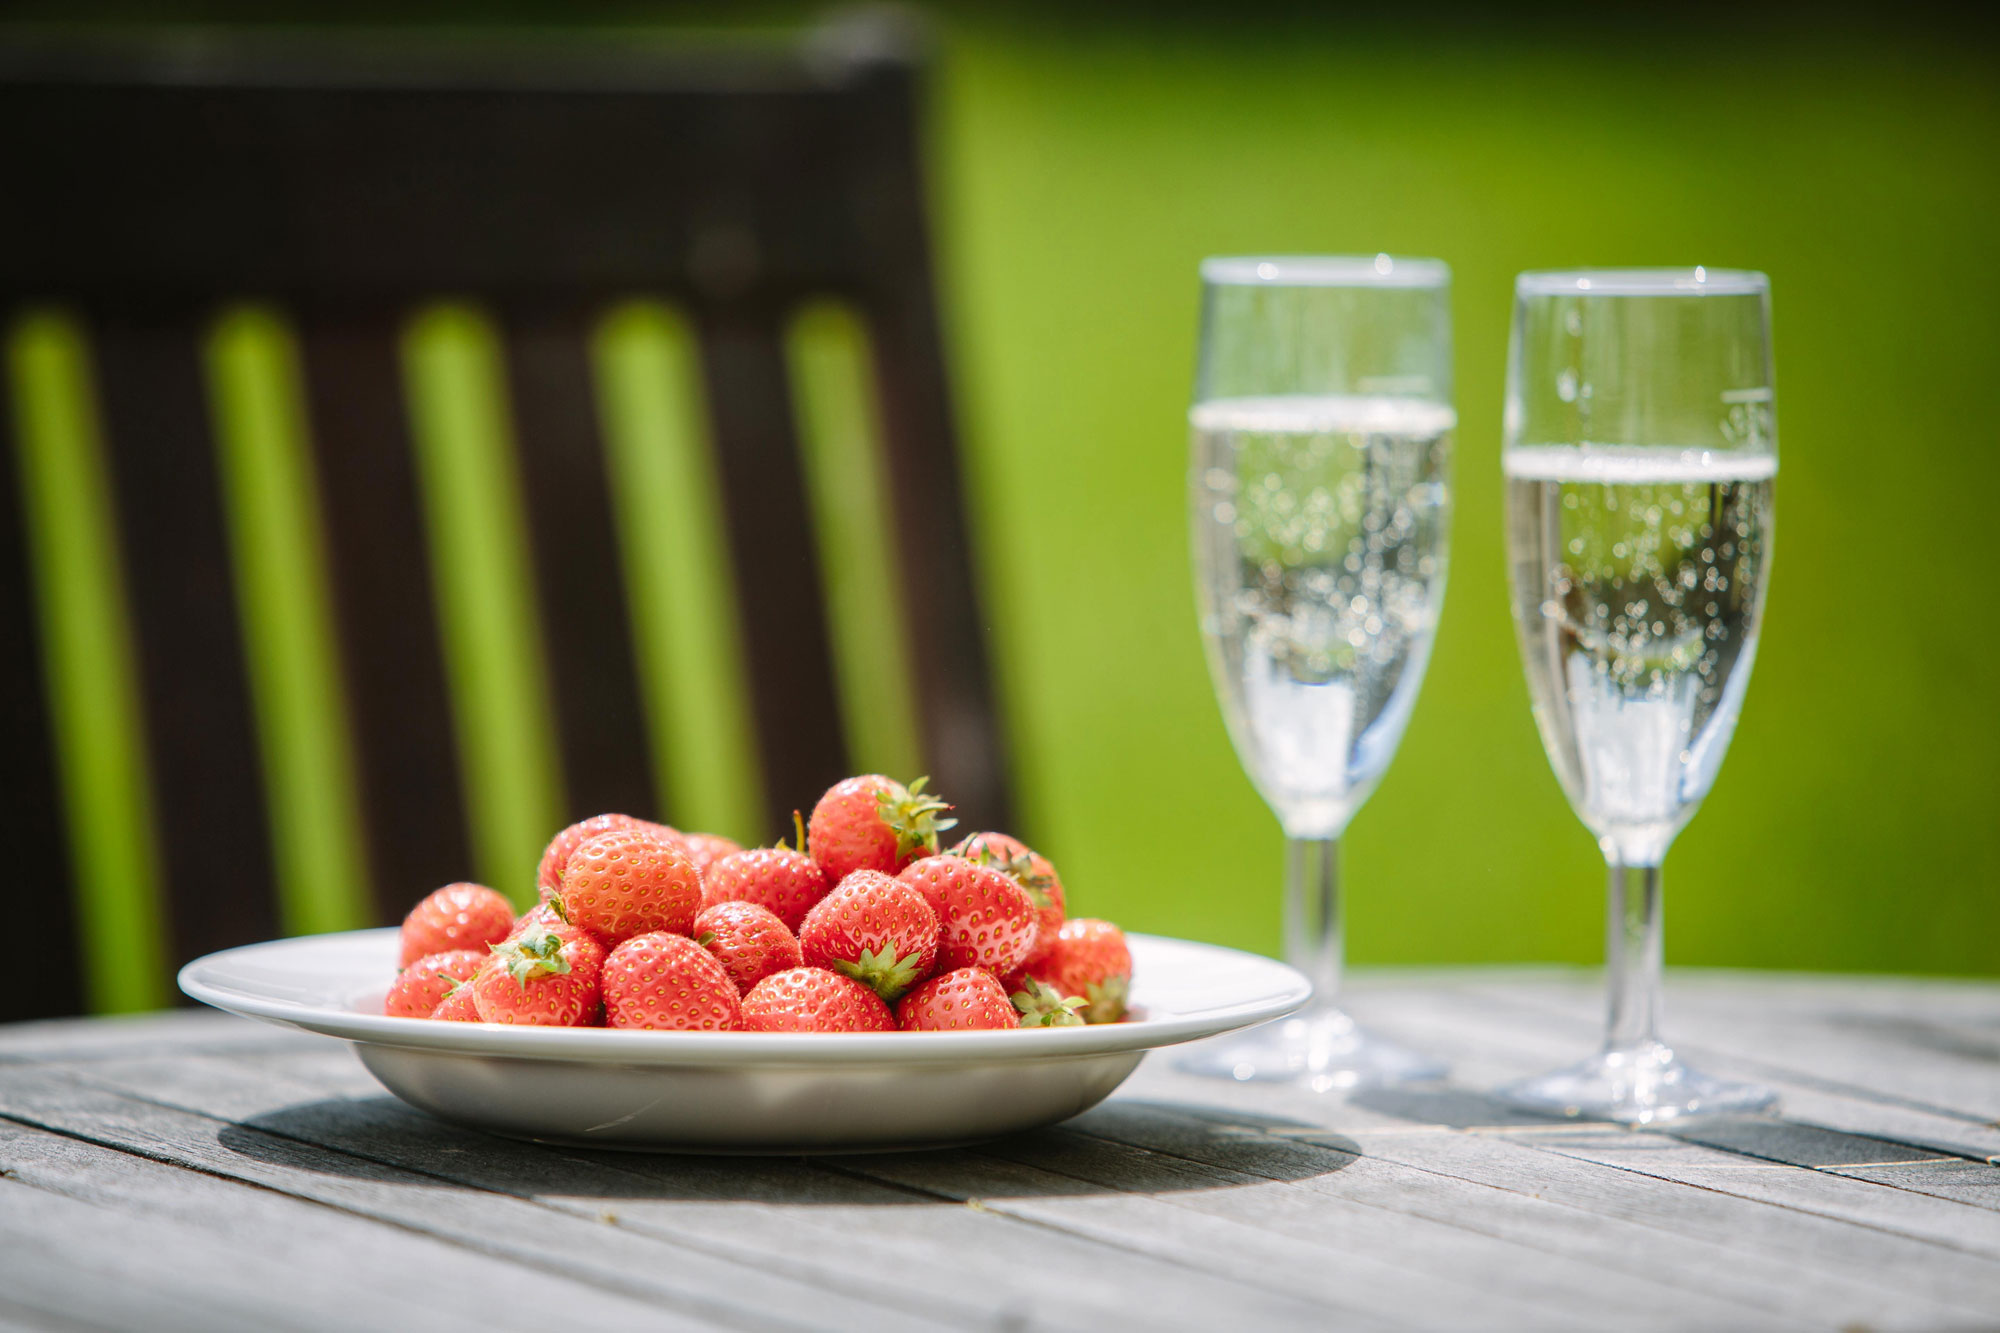 Nothing like a plate of strawberries and a glass of fizz in the garden